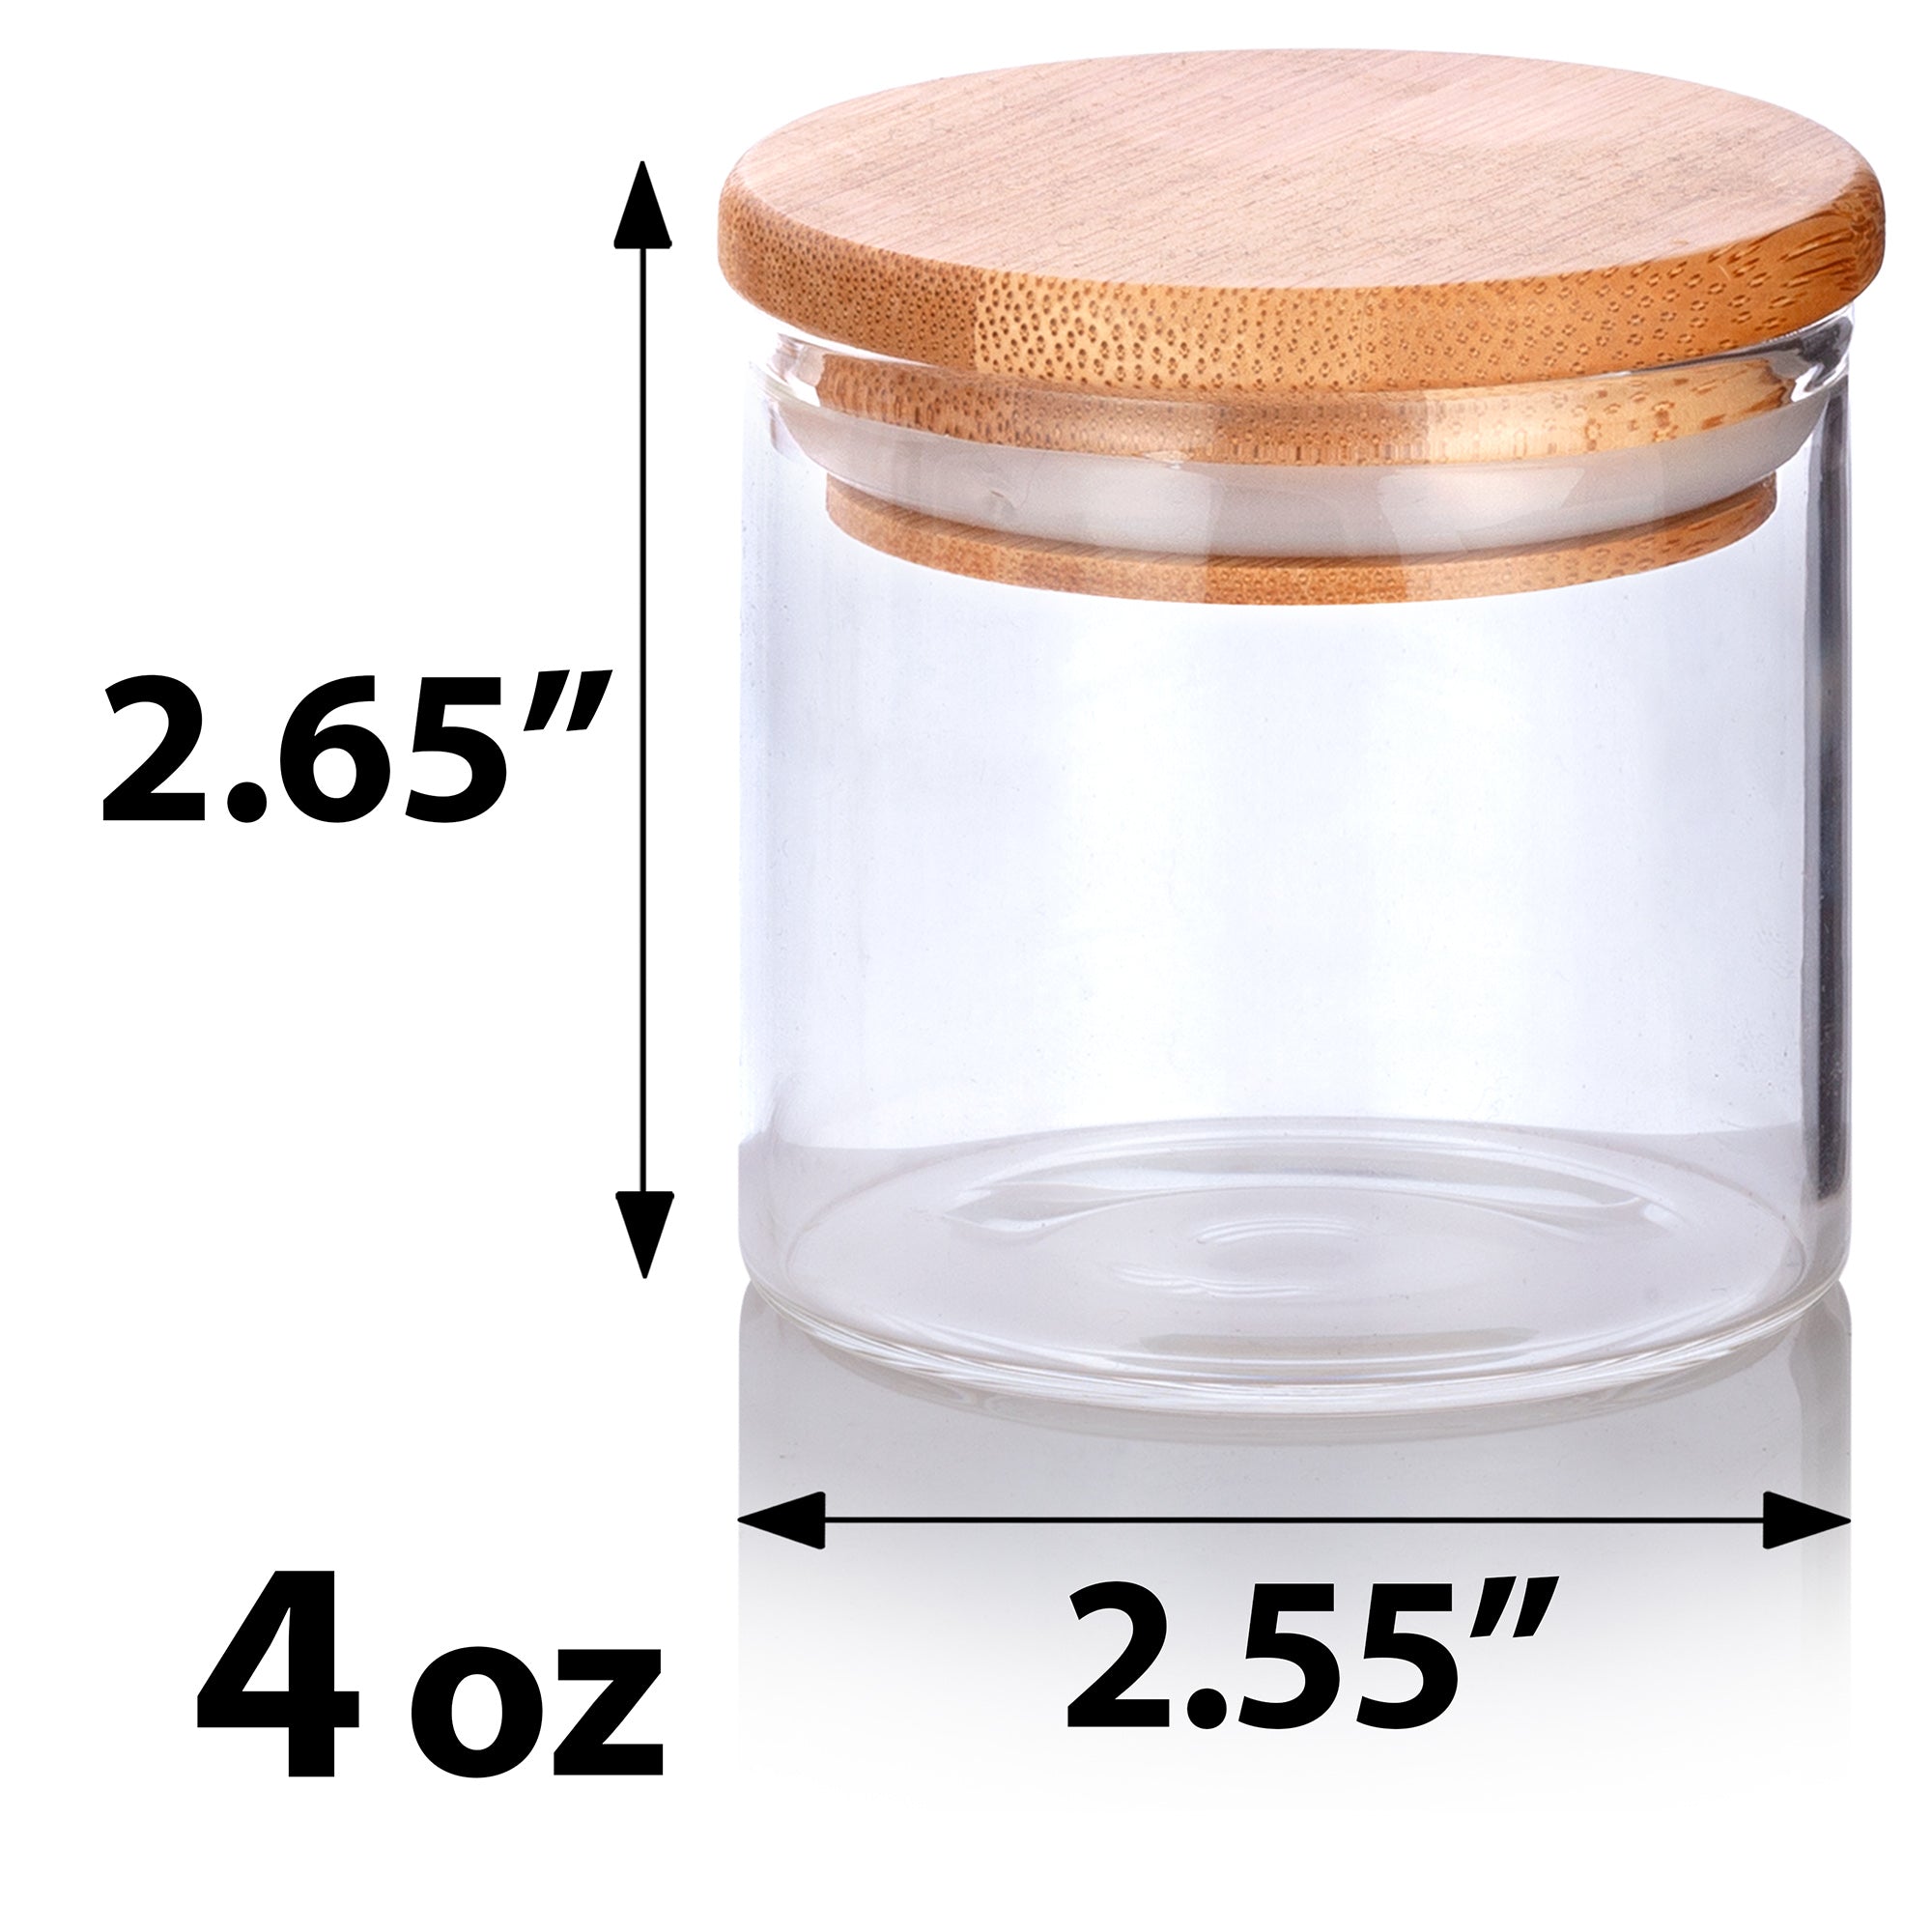 10 oz Candle Making Jar Borosilicate Glass with Bamboo Silicone Sealed Lid (6 Pack)